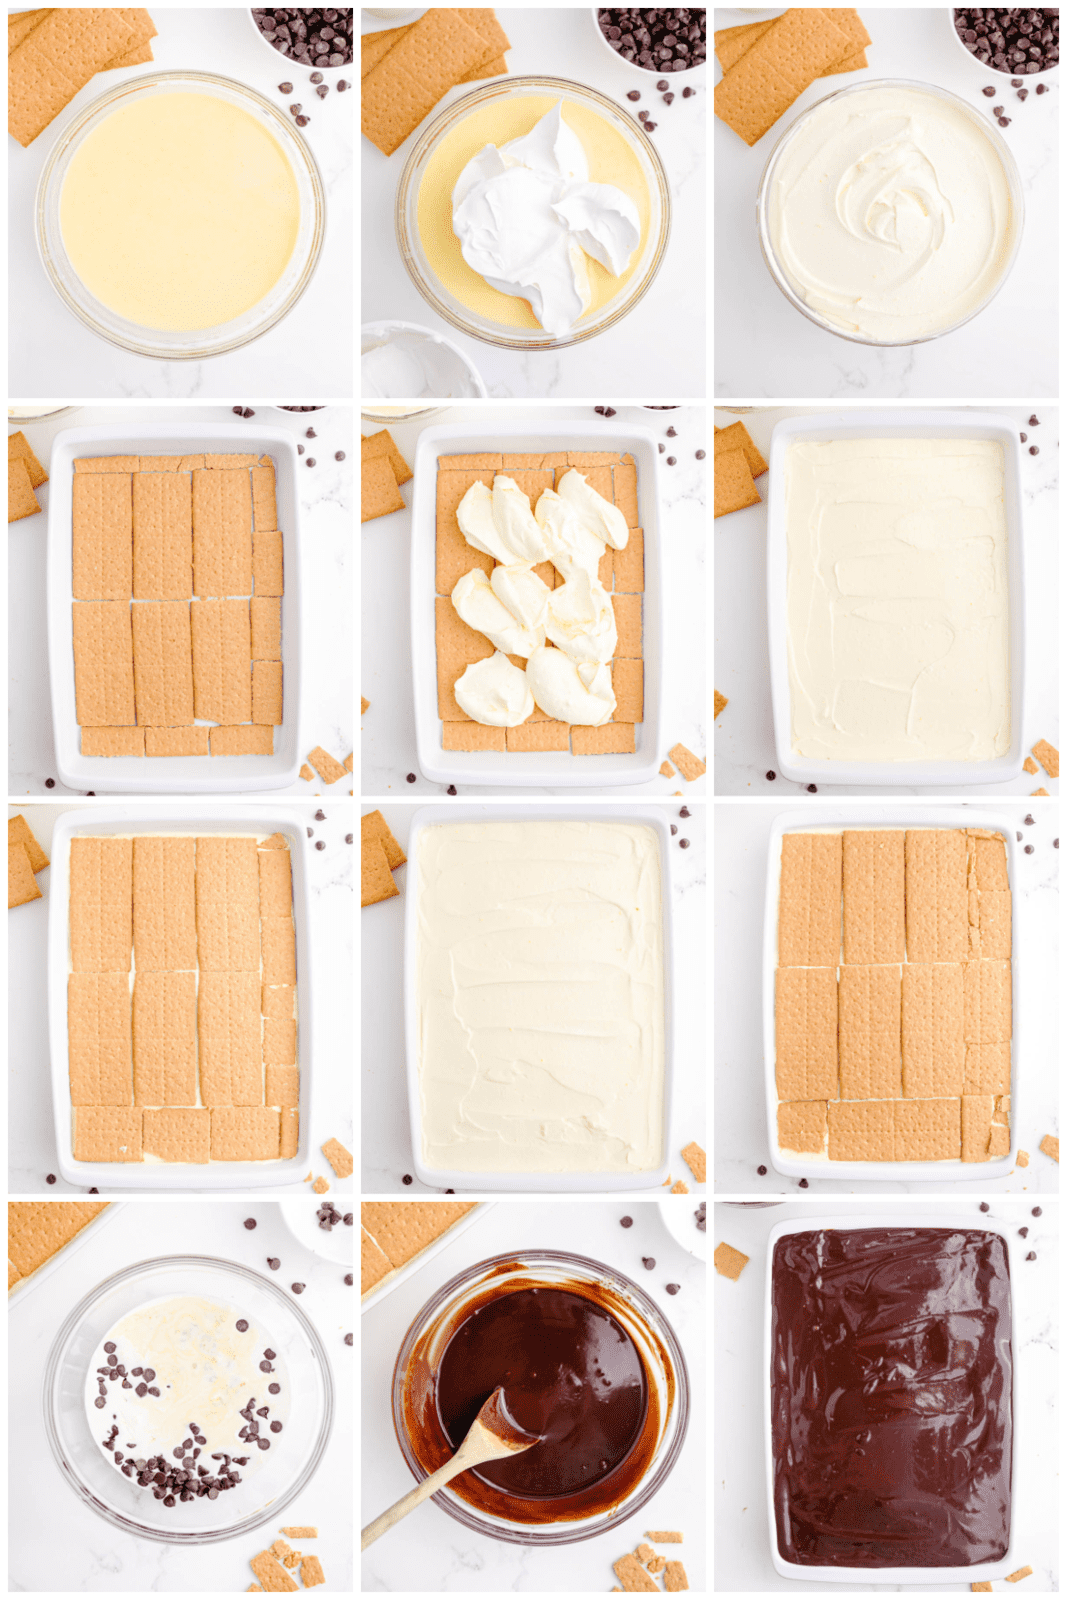 Step by step photos on how to make an Eclair Cake.